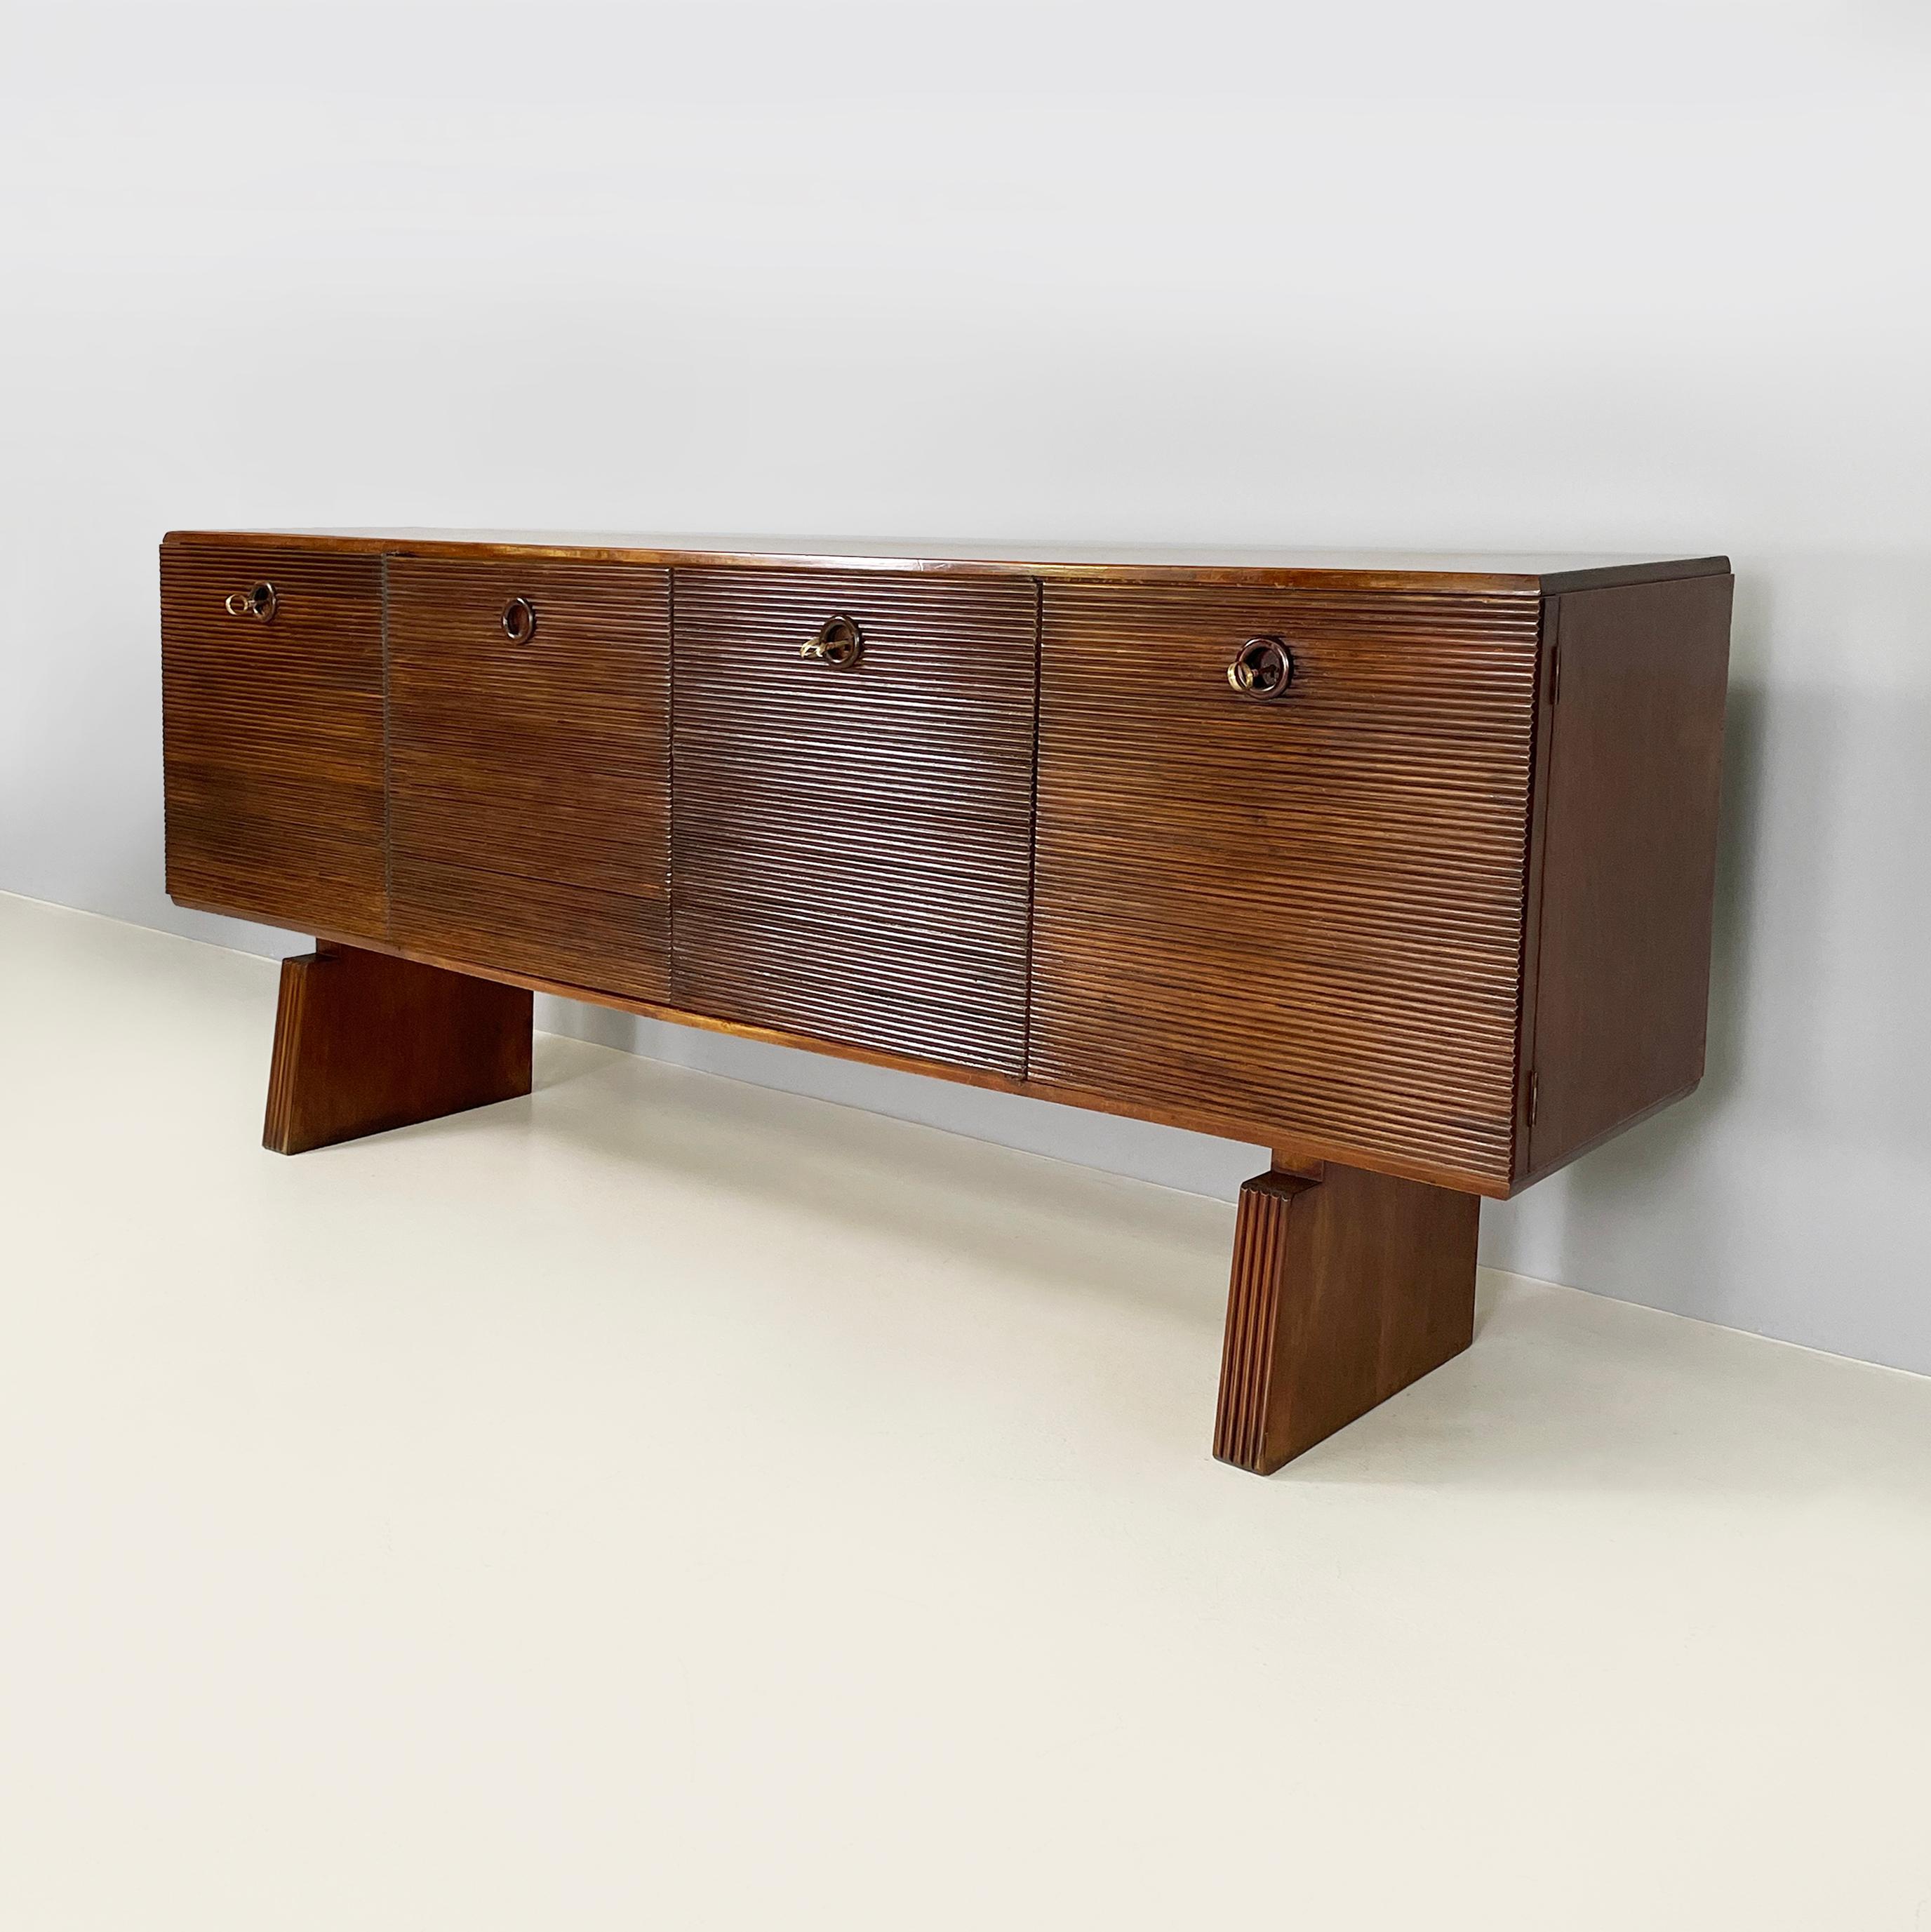 Mid-20th Century Italian Art Deco wooden sideboard with four doors by Gio Ponti, 1940s  For Sale